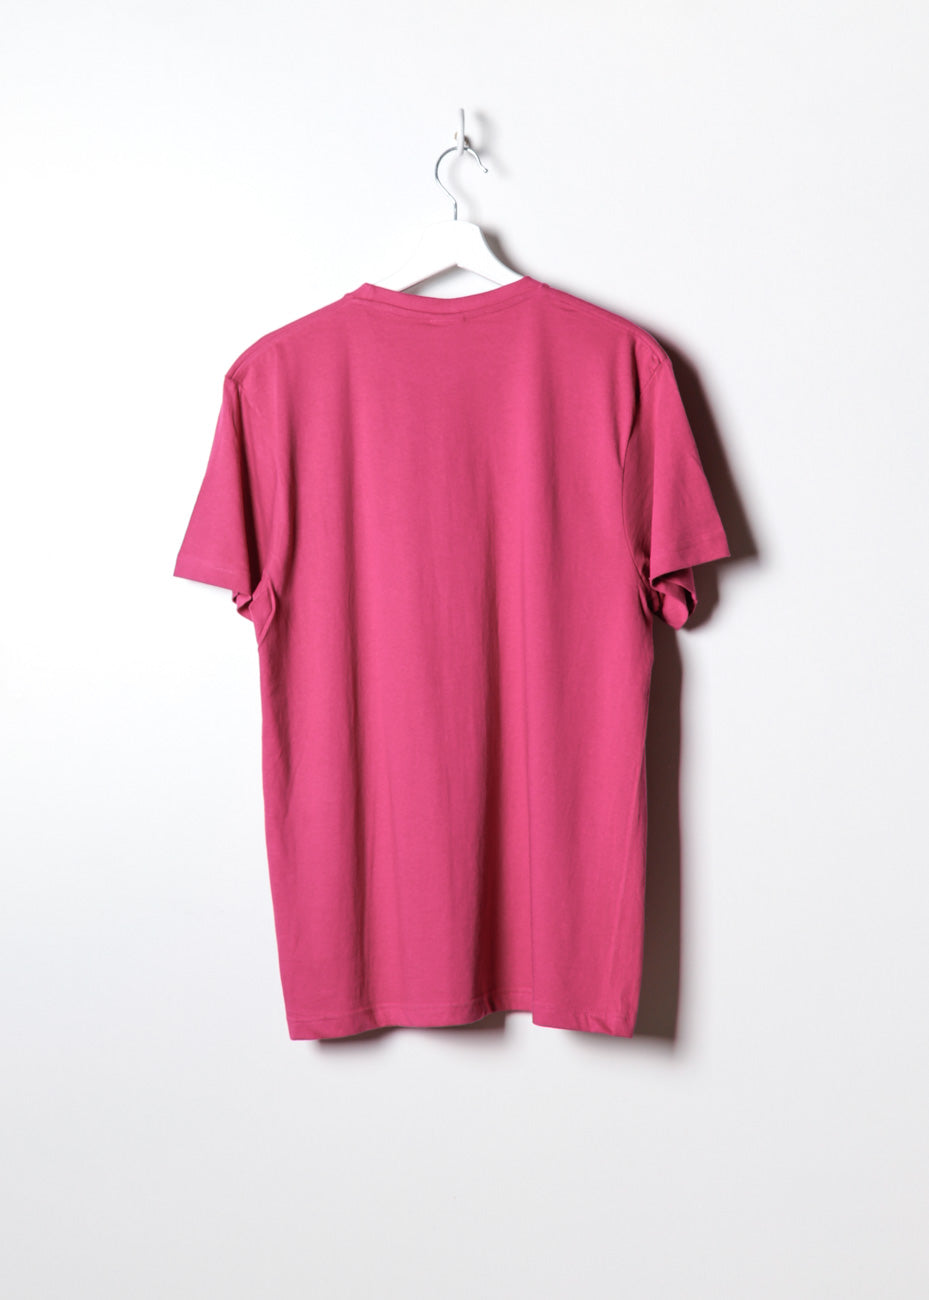 BeThrifty "Essential" T-Shirt in Rosa